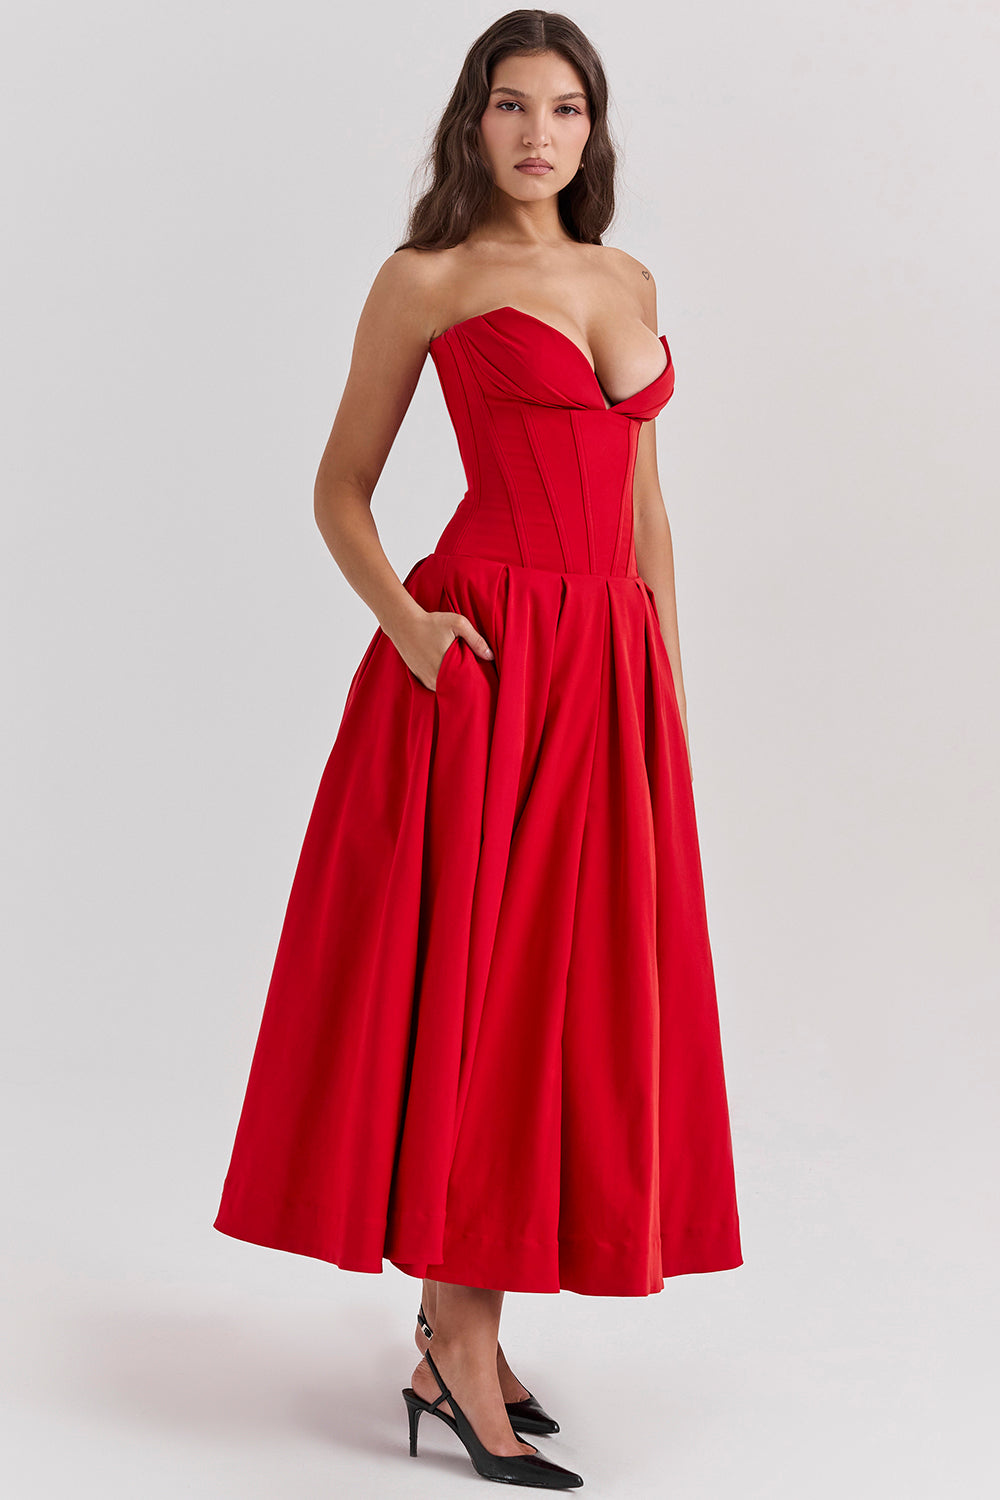 Hire HOUSE OF CB Lady Strapless Midi Dress in Scarlet Red